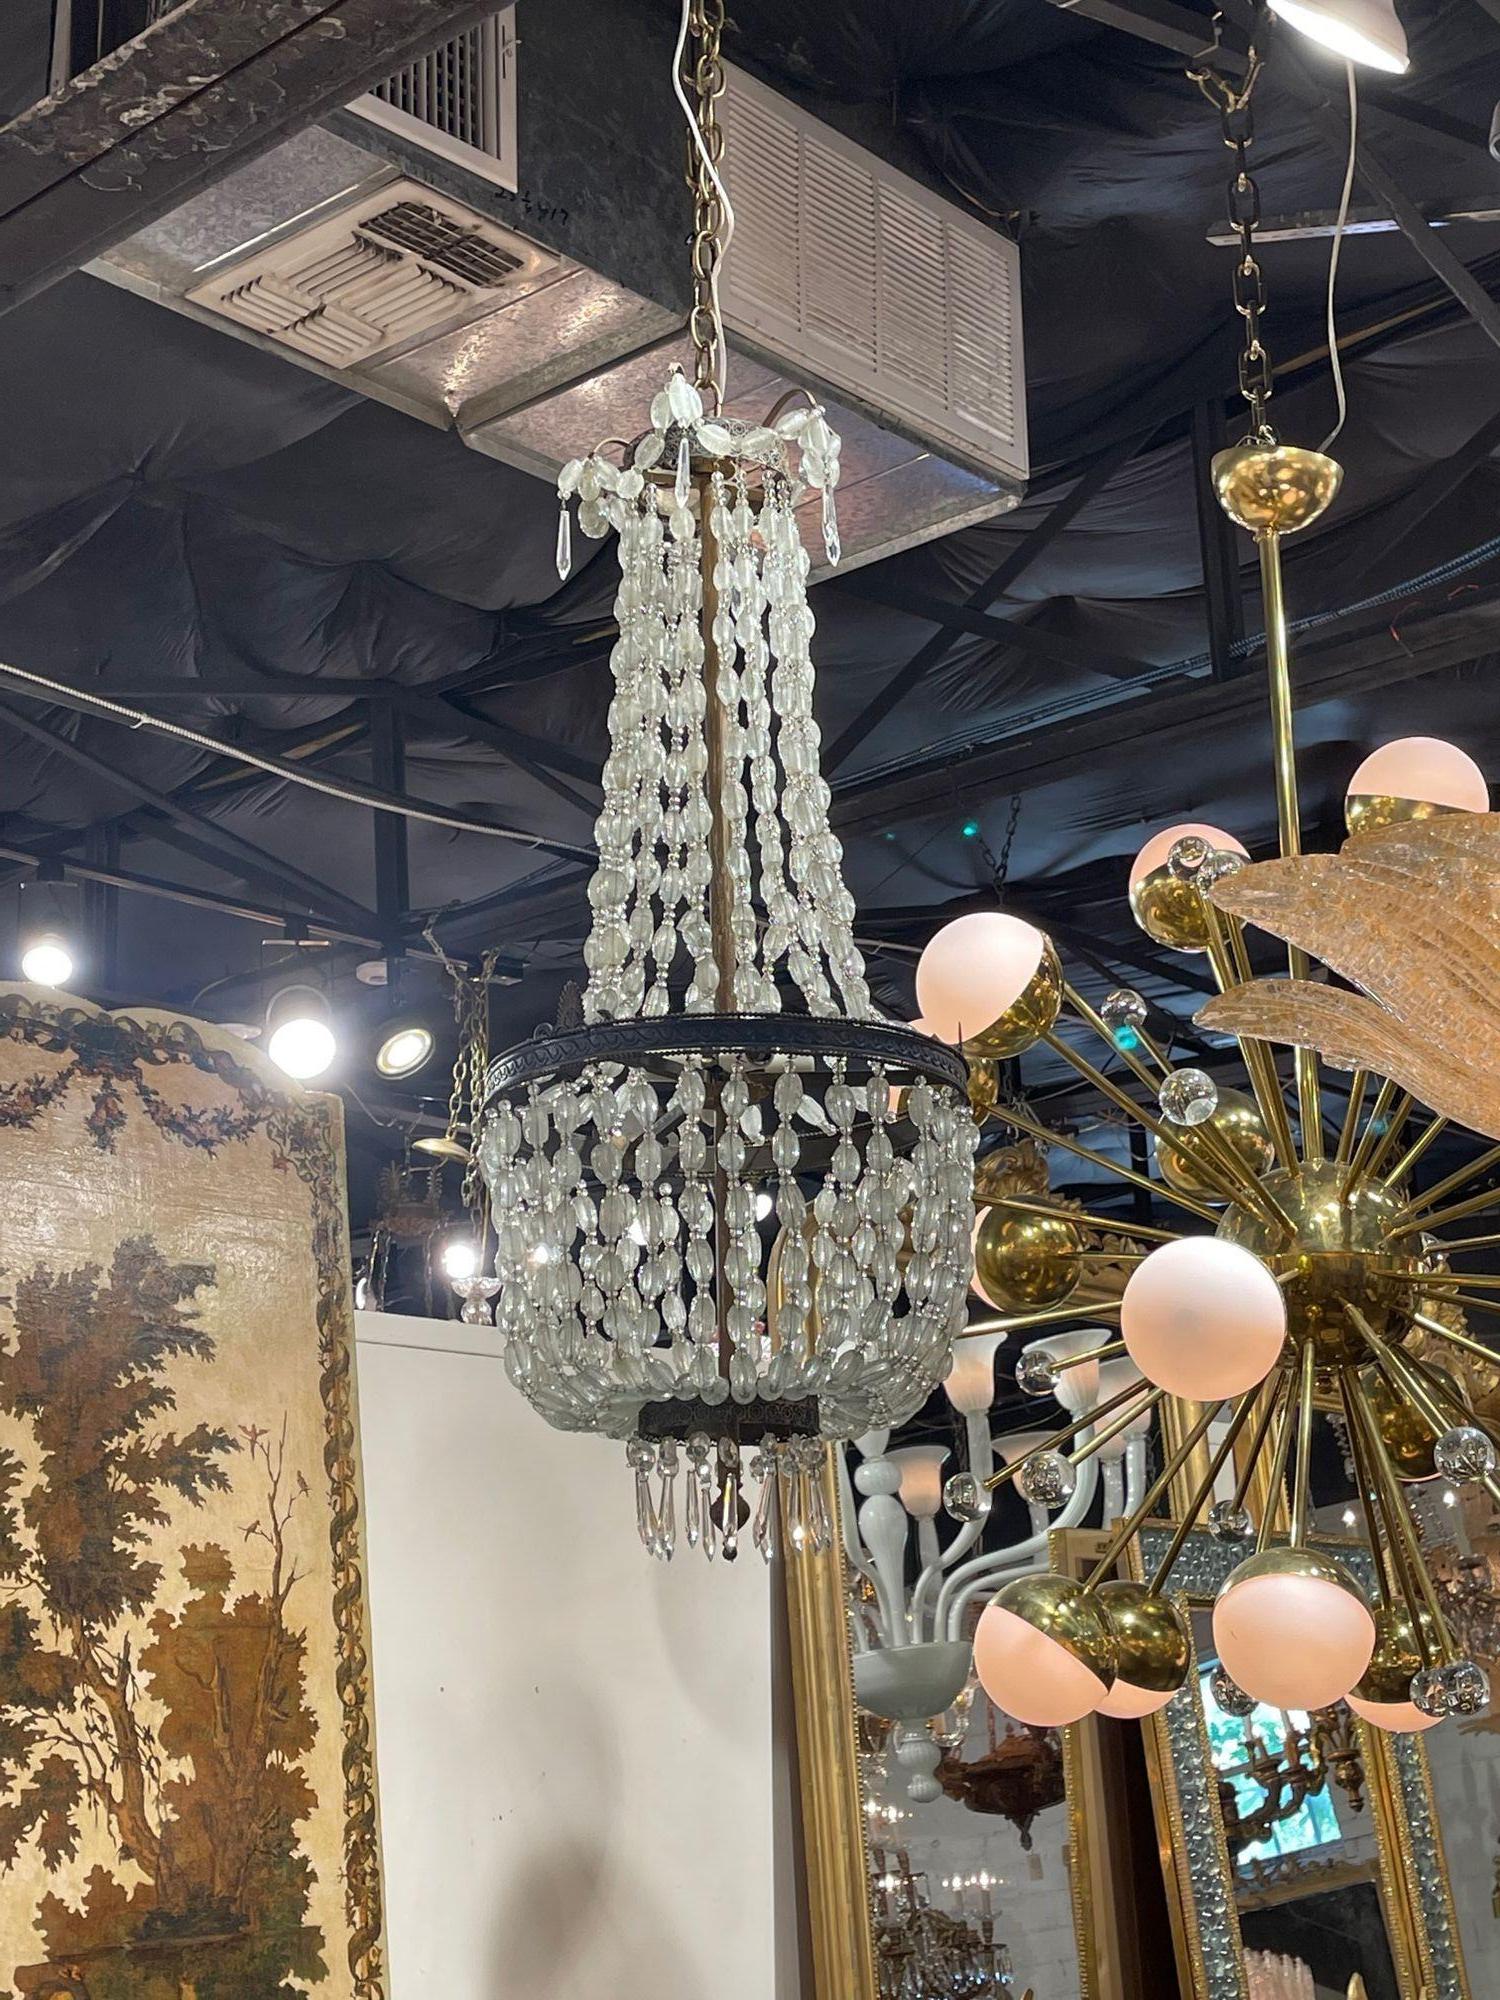 Early 20th century Italian rock crystal chandelier. Circa 1920. The chandelier has been professionally re-wired, cleaned and is ready to hang. Includes matching chain and canopy.